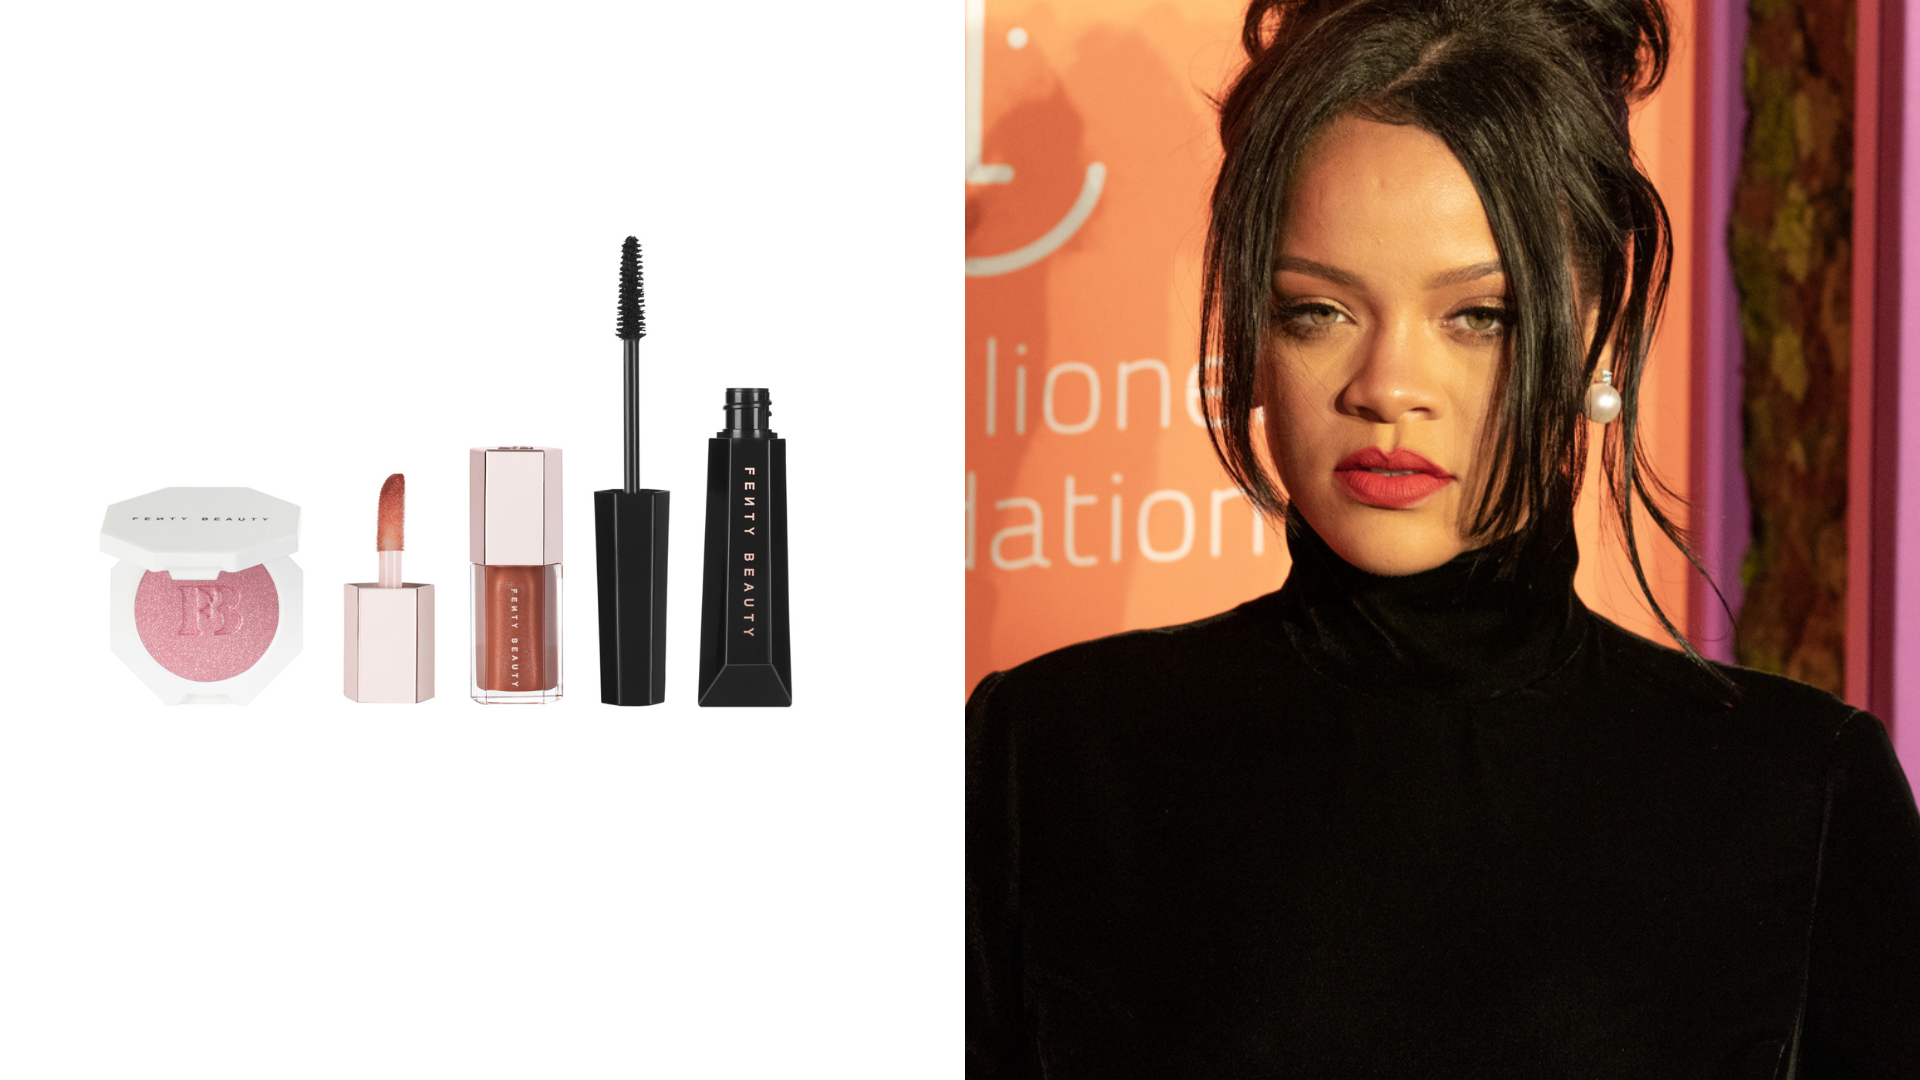 Target Teams Up With Rihanna's Fenty Beauty For Exclusive Product